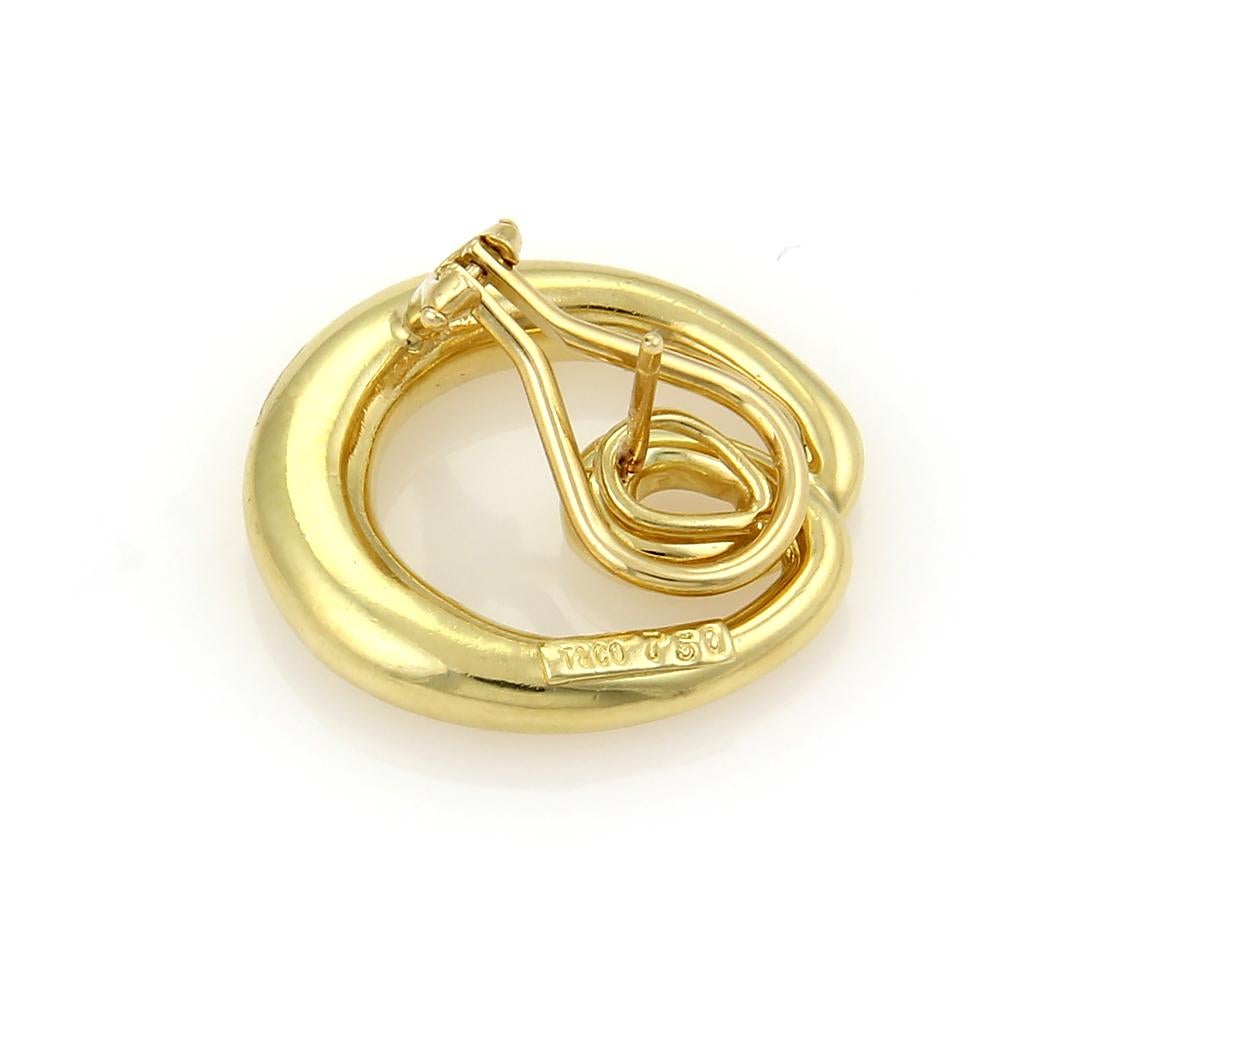 Tiffany & Co. Double Loop Open Oval 18k Yellow Gold Earrings In Excellent Condition For Sale In Boca Raton, FL